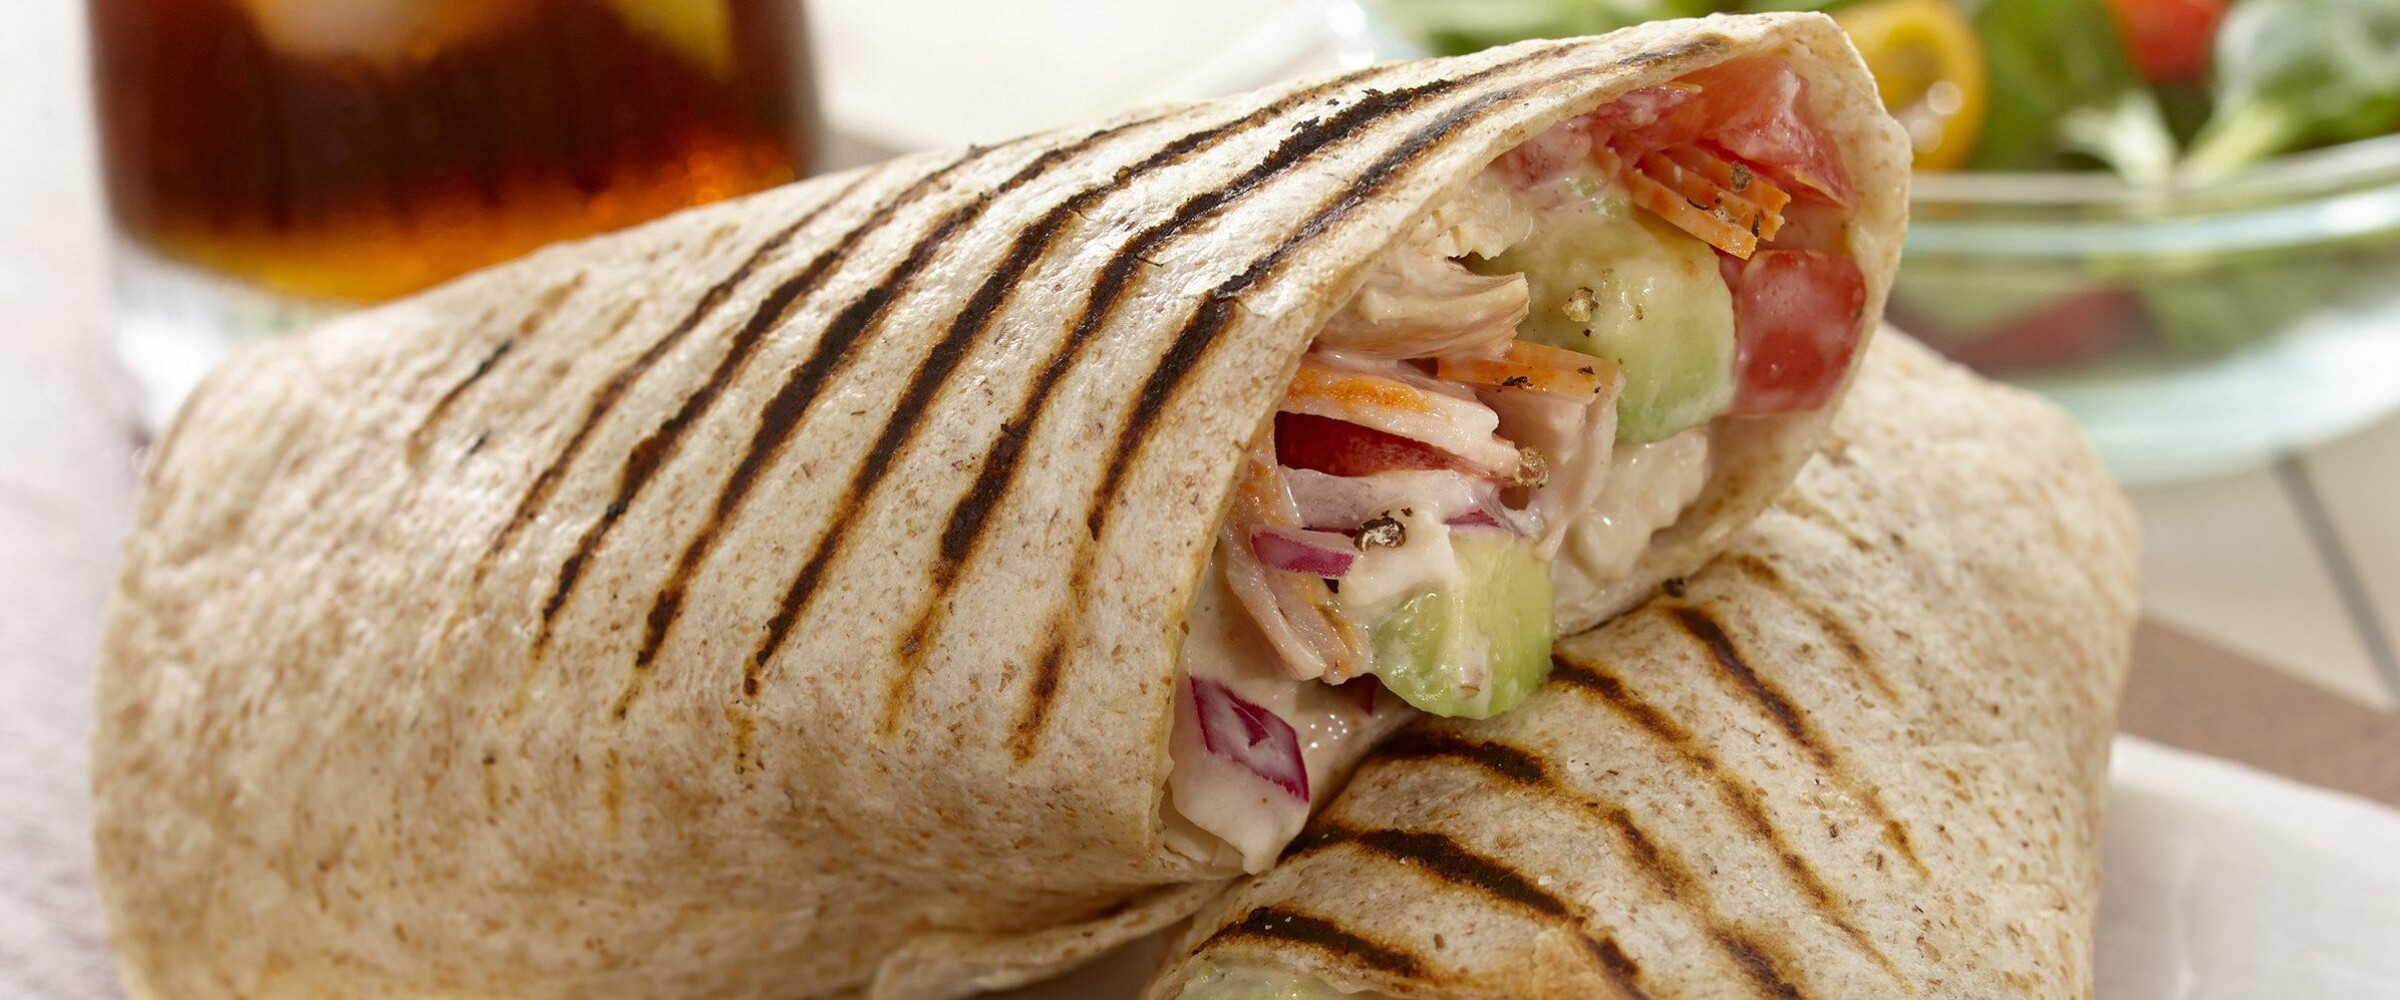 Ham and avocado in a wrap